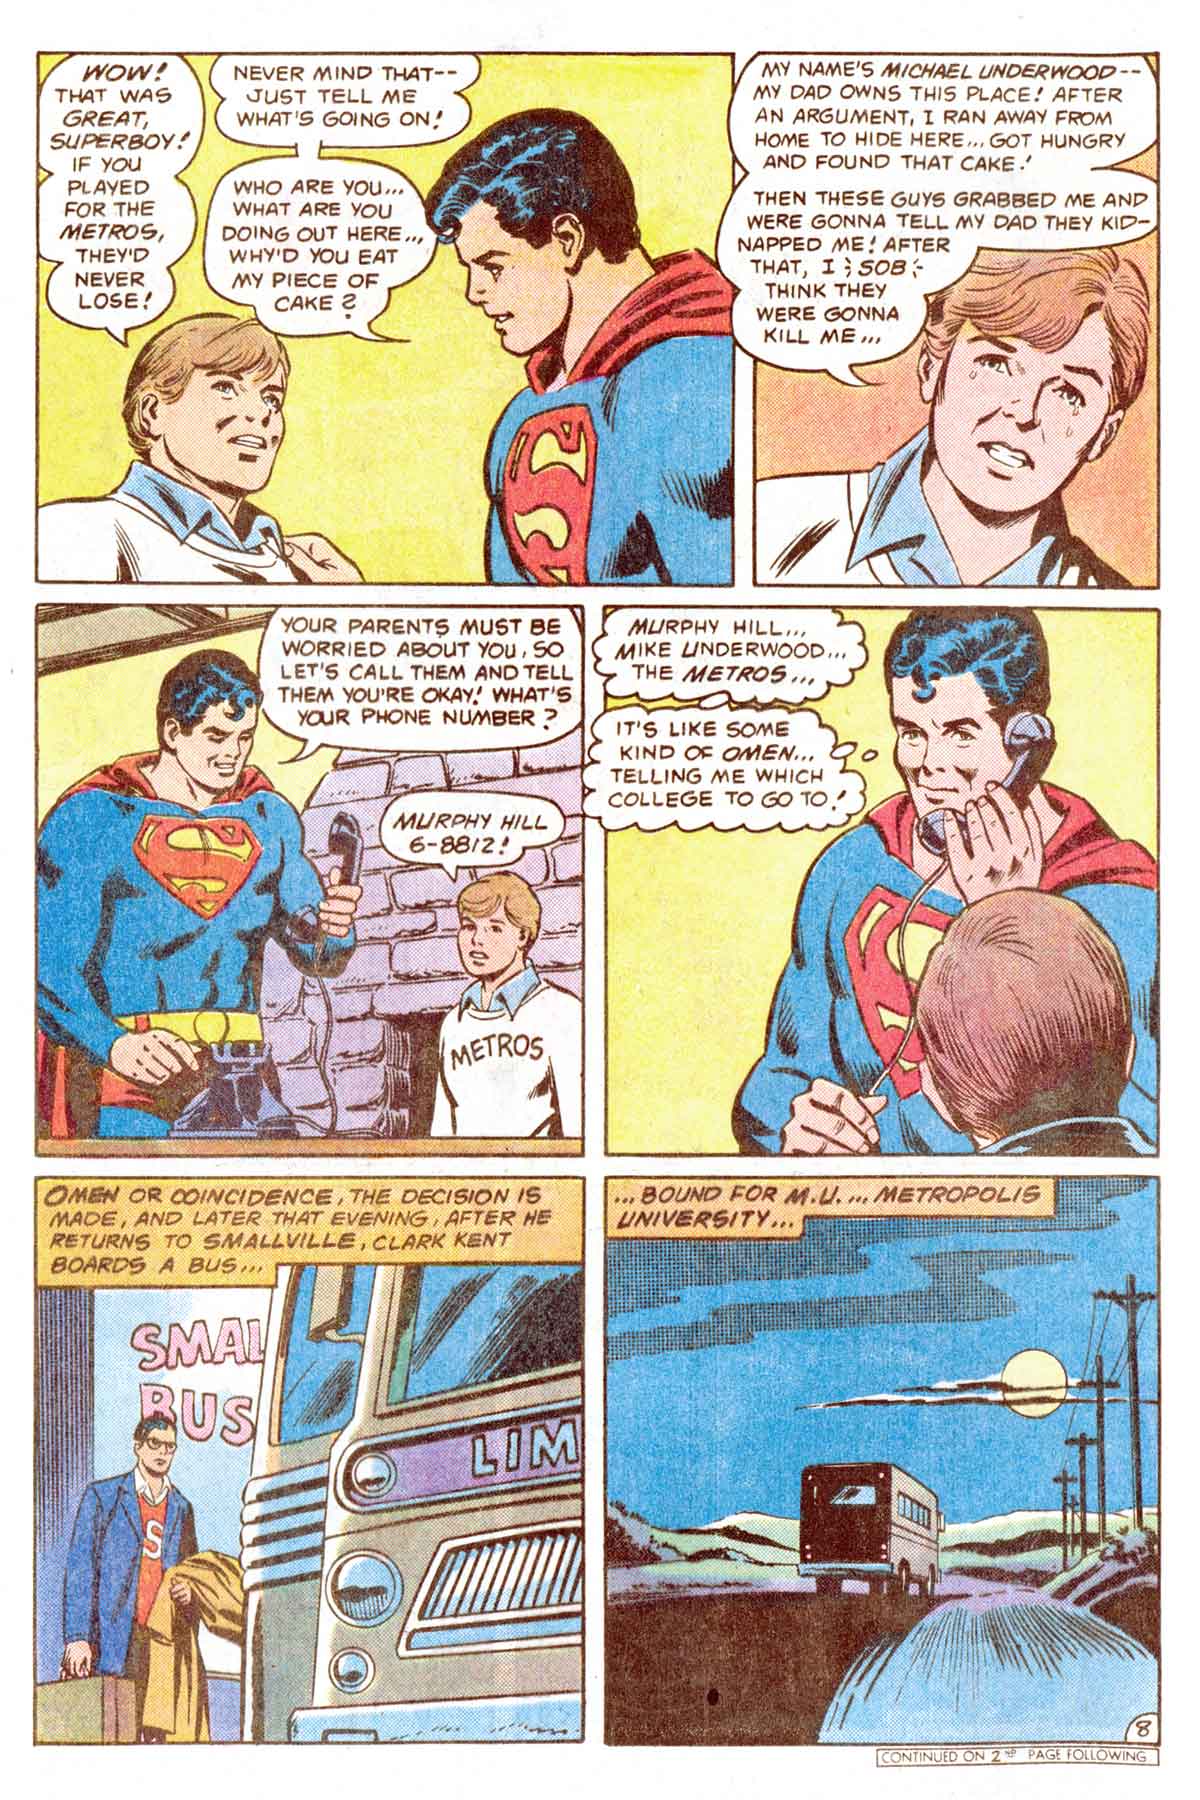 The New Adventures of Superboy 51 Page 8